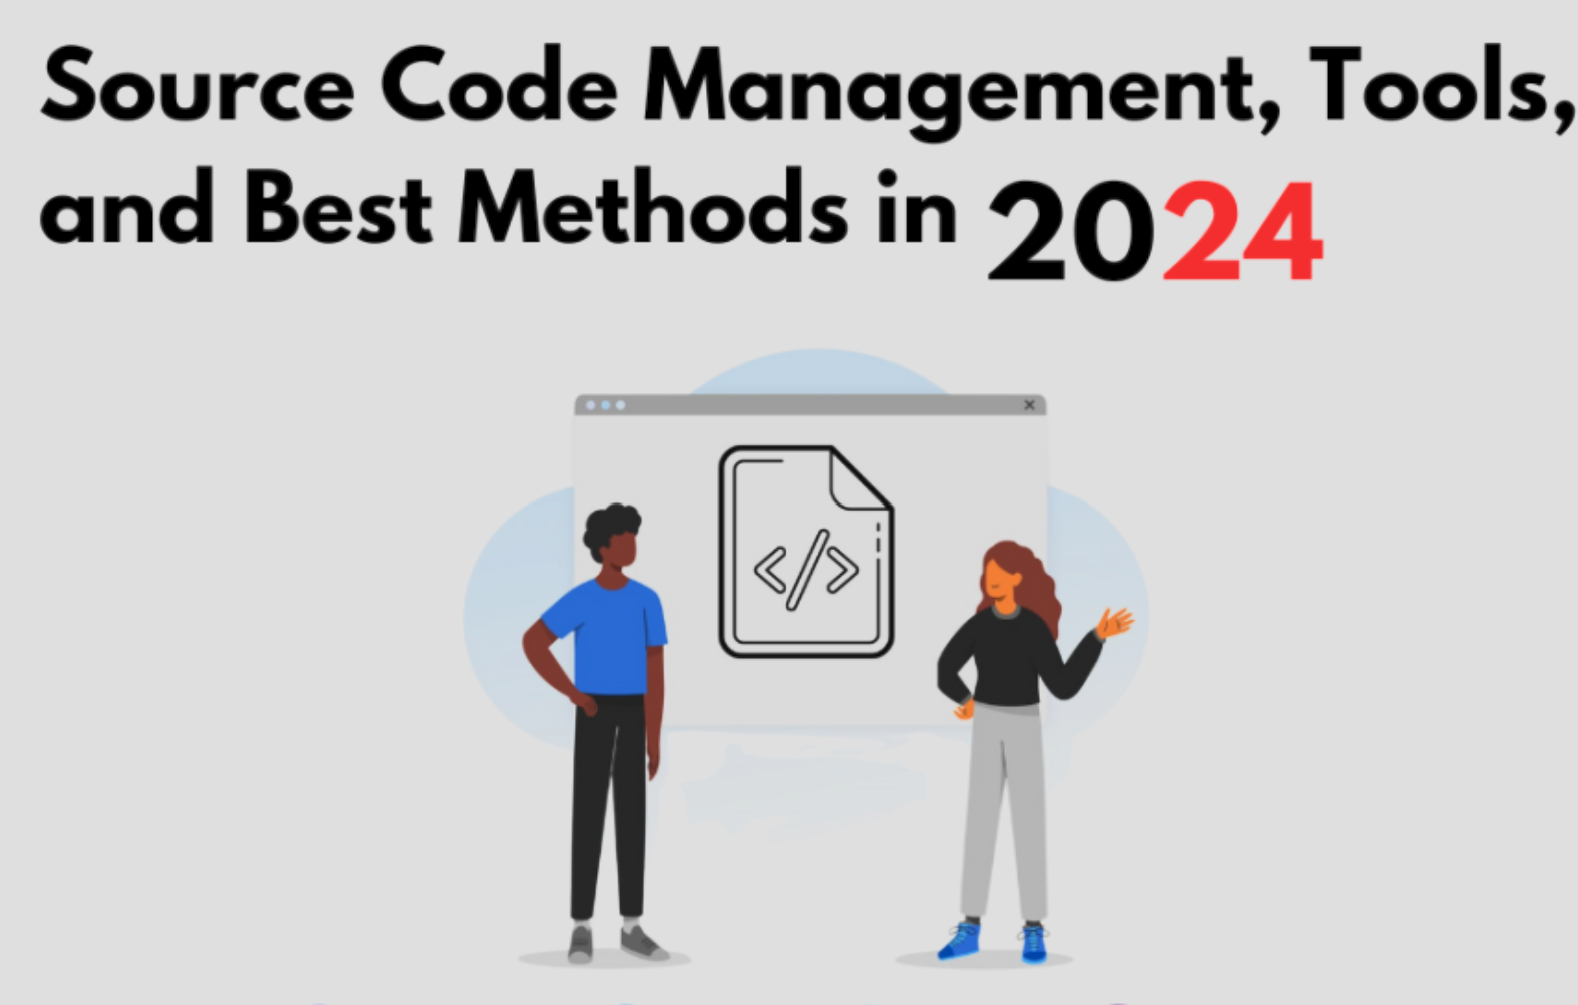 Guide to Source Code Management: Tools and Practices for 2024